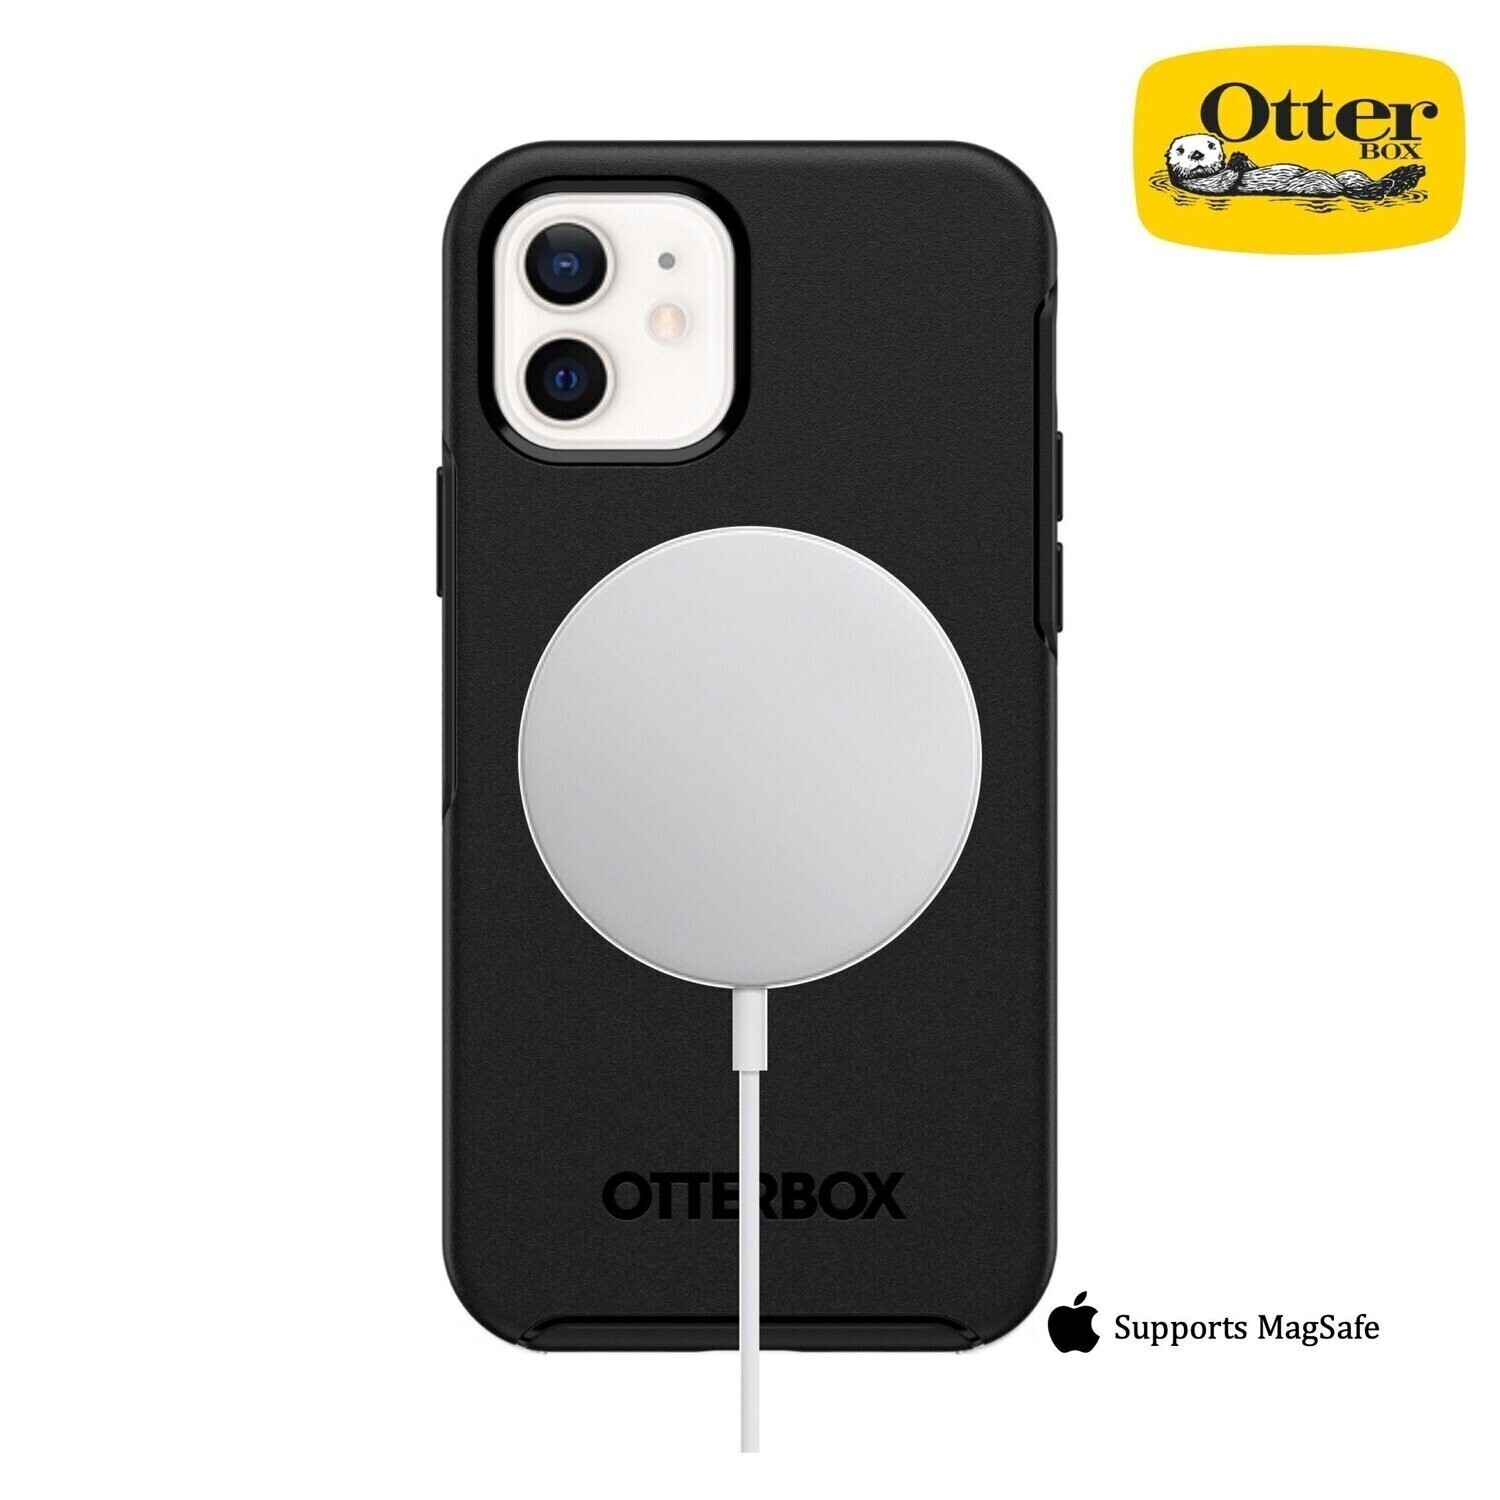 OtterBox iPhone 12 mini 5.4" Symmetry Series+ Case with MagSafe, Black